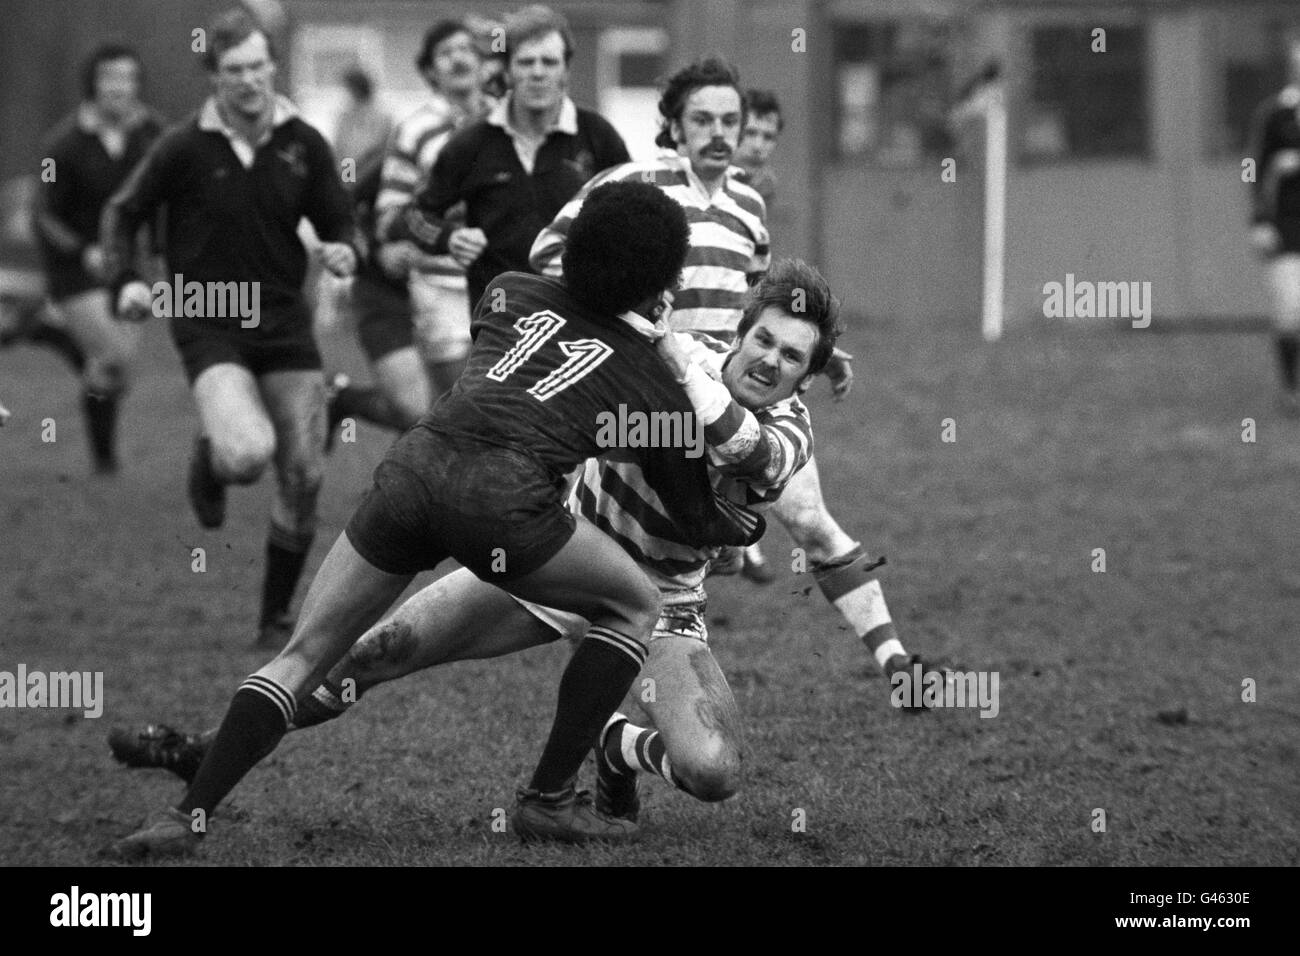 Rugby Union - Wasps v Gosforth - Sudbury. Wasps Sol N'Jie (No.11) tackles S. Archer of Gosforth Stock Photo